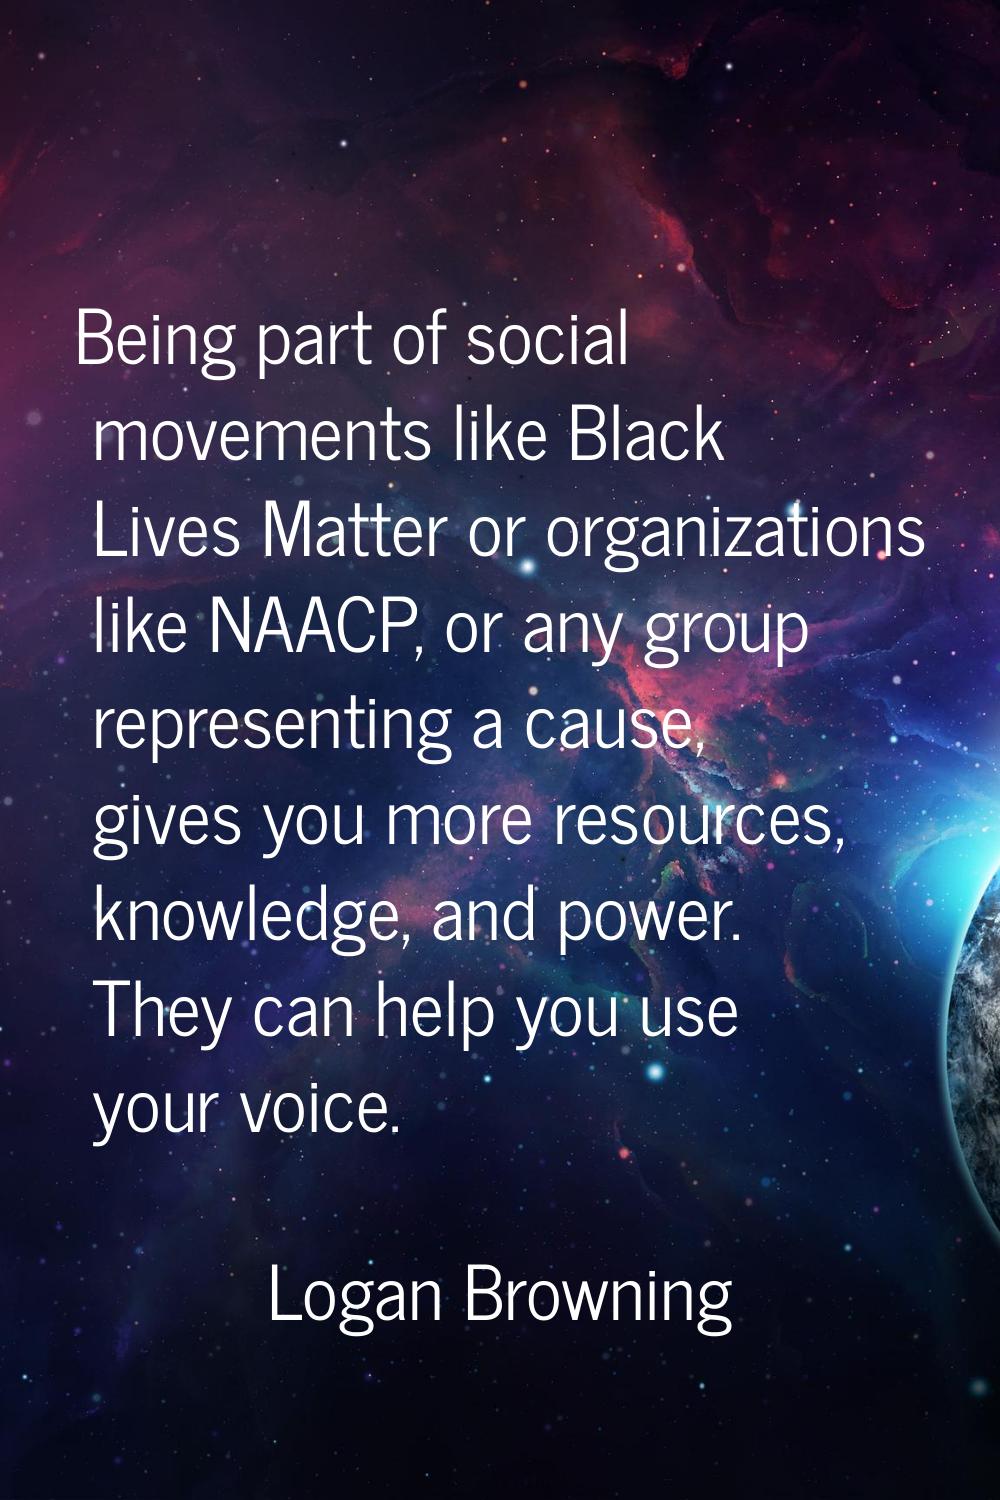 Being part of social movements like Black Lives Matter or organizations like NAACP, or any group re